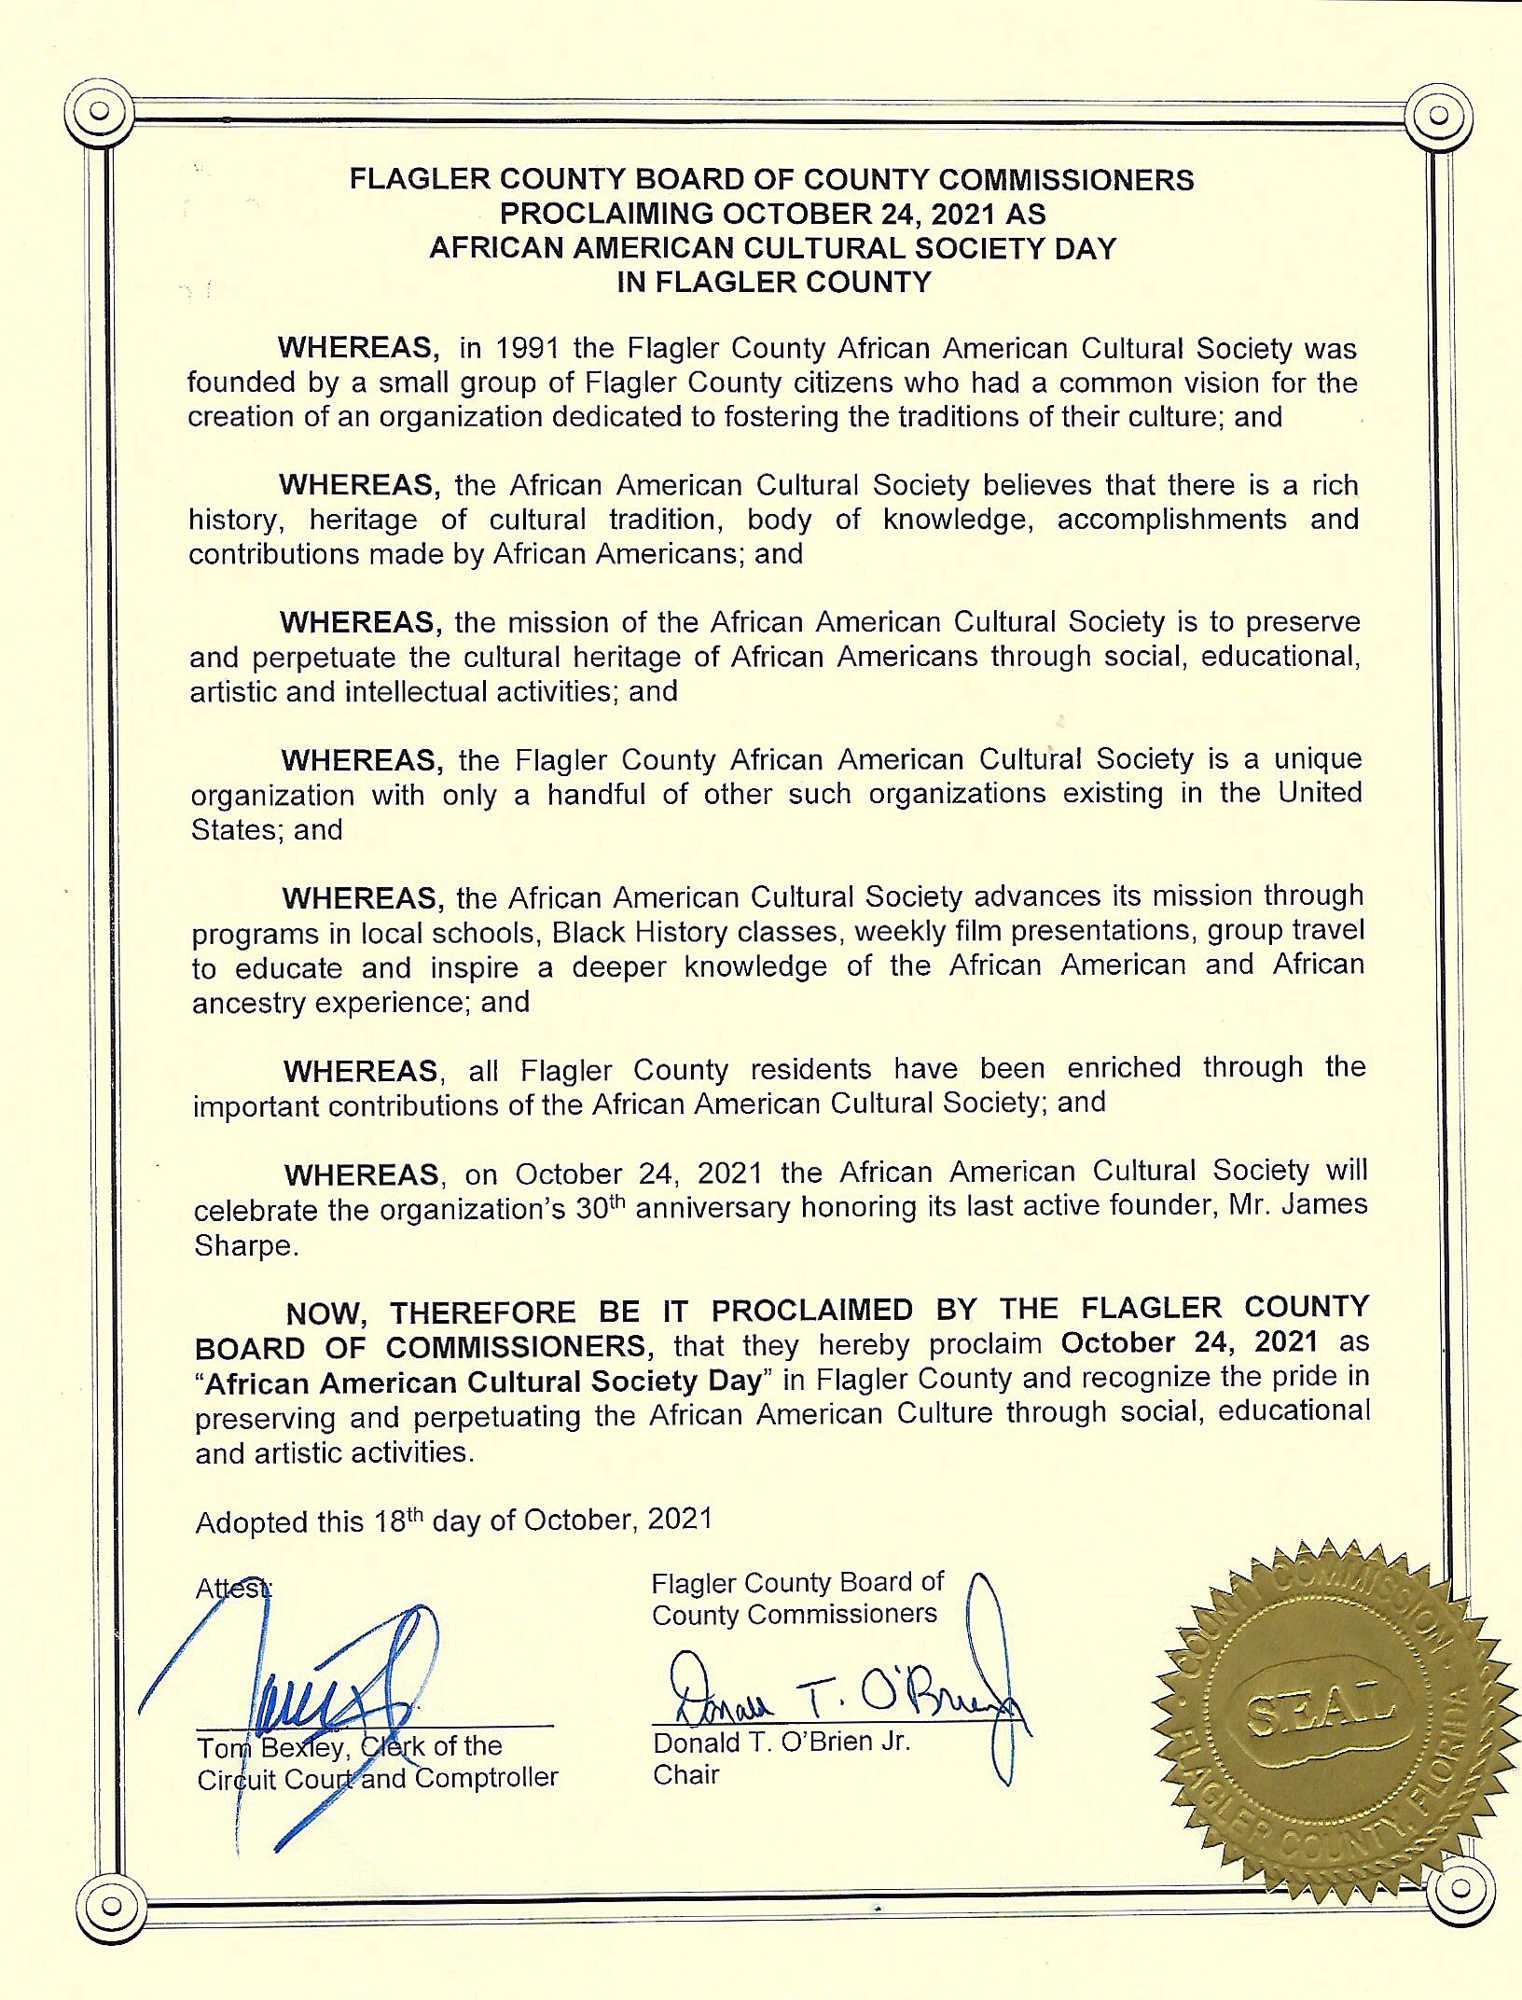 The proclamation from the Flagler County Board of Commissioners.